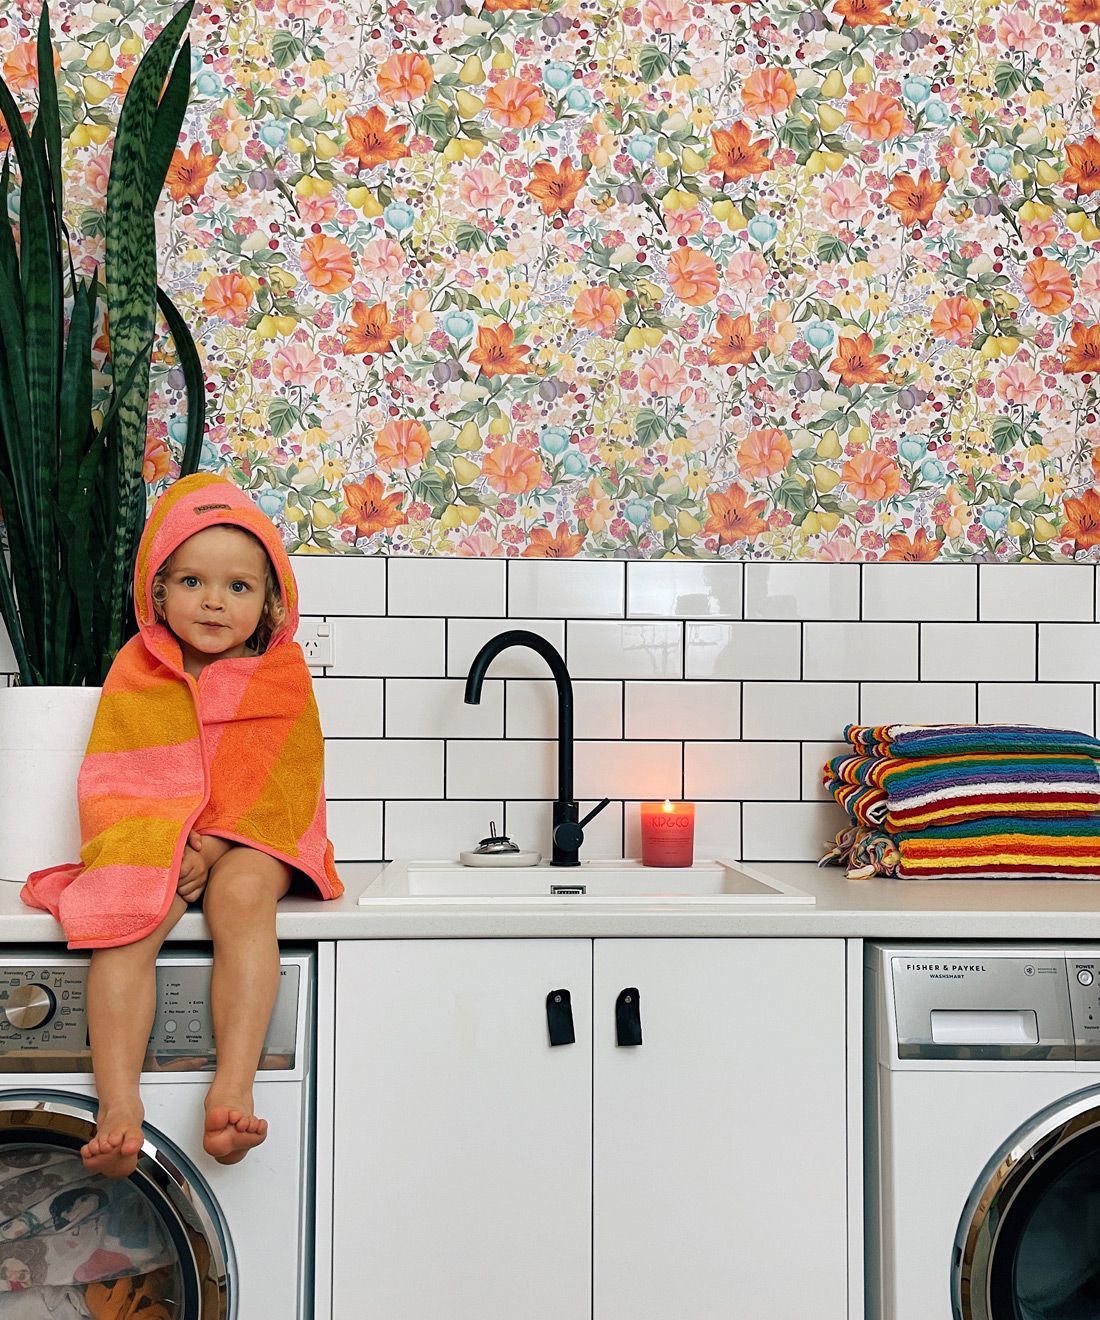 Abundance Wallpaper • Kip&Co • Colorful Floral Wallpaper • laundry room insitu with young girl sitting on washing machine by Rosie Clark